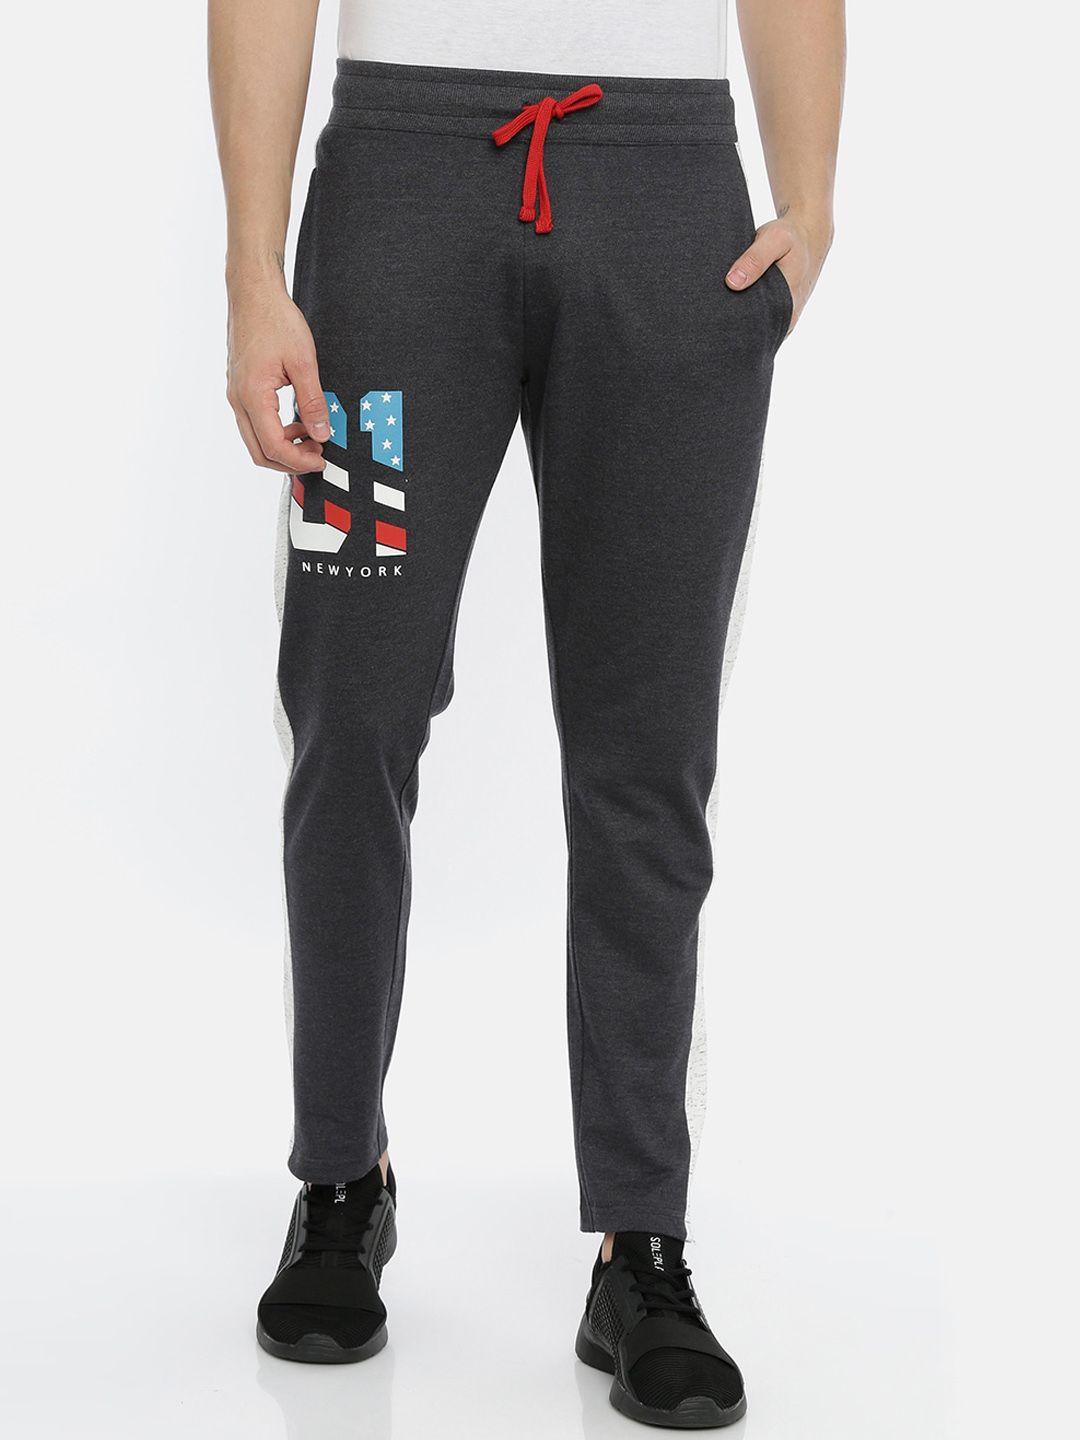 3pin-men-charcoal-grey-&-white-solid-cotton-track-pants